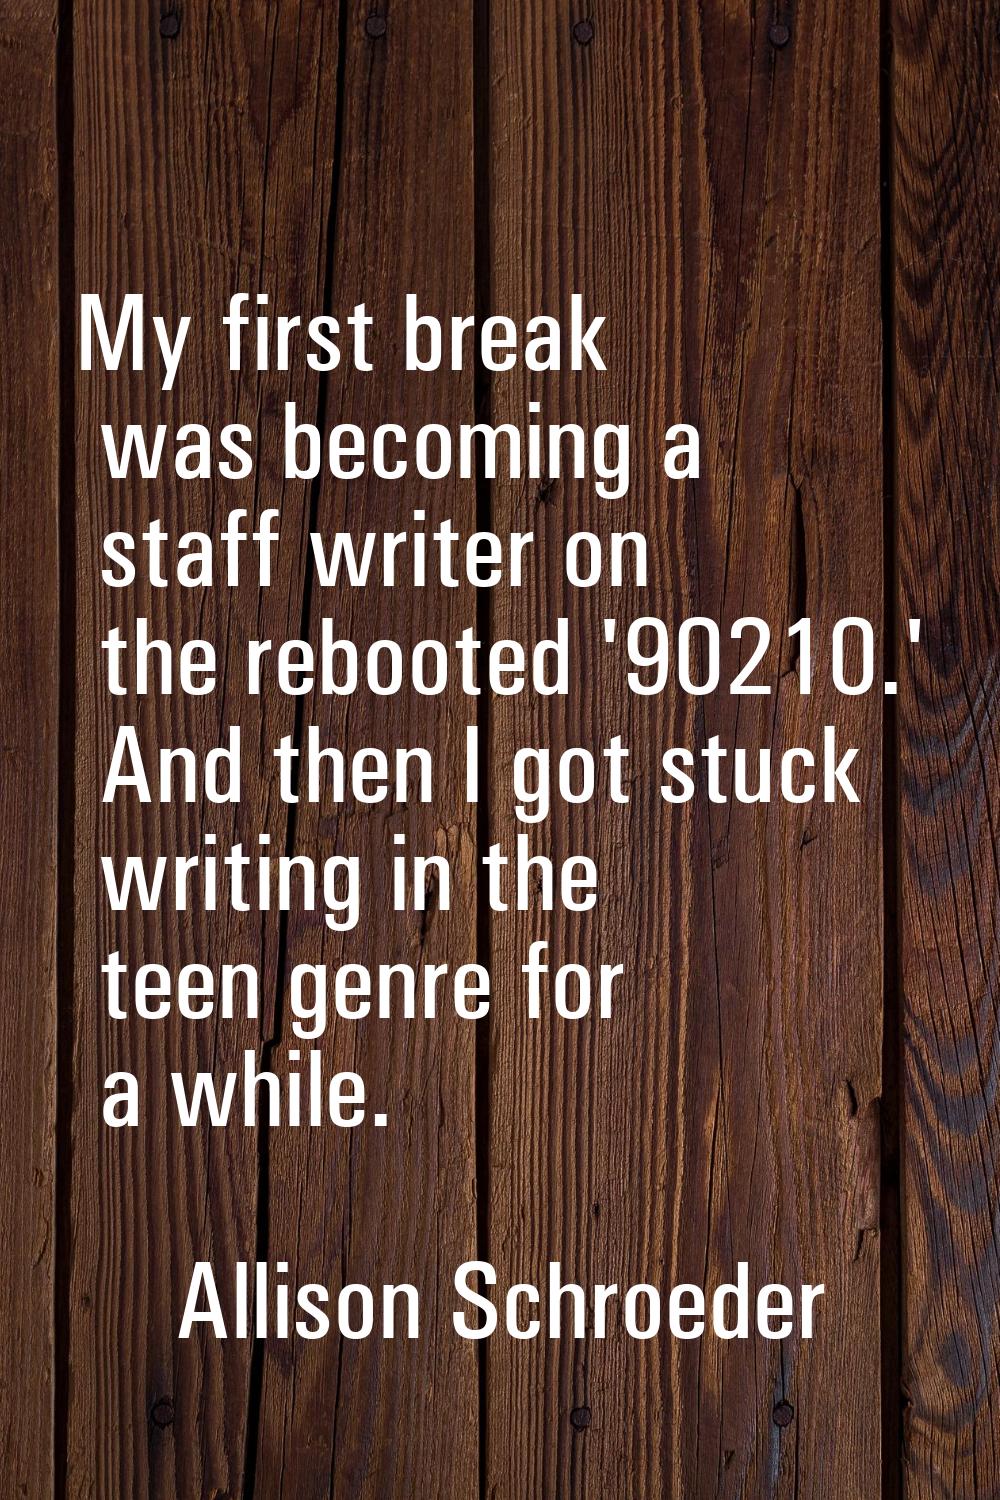 My first break was becoming a staff writer on the rebooted '90210.' And then I got stuck writing in